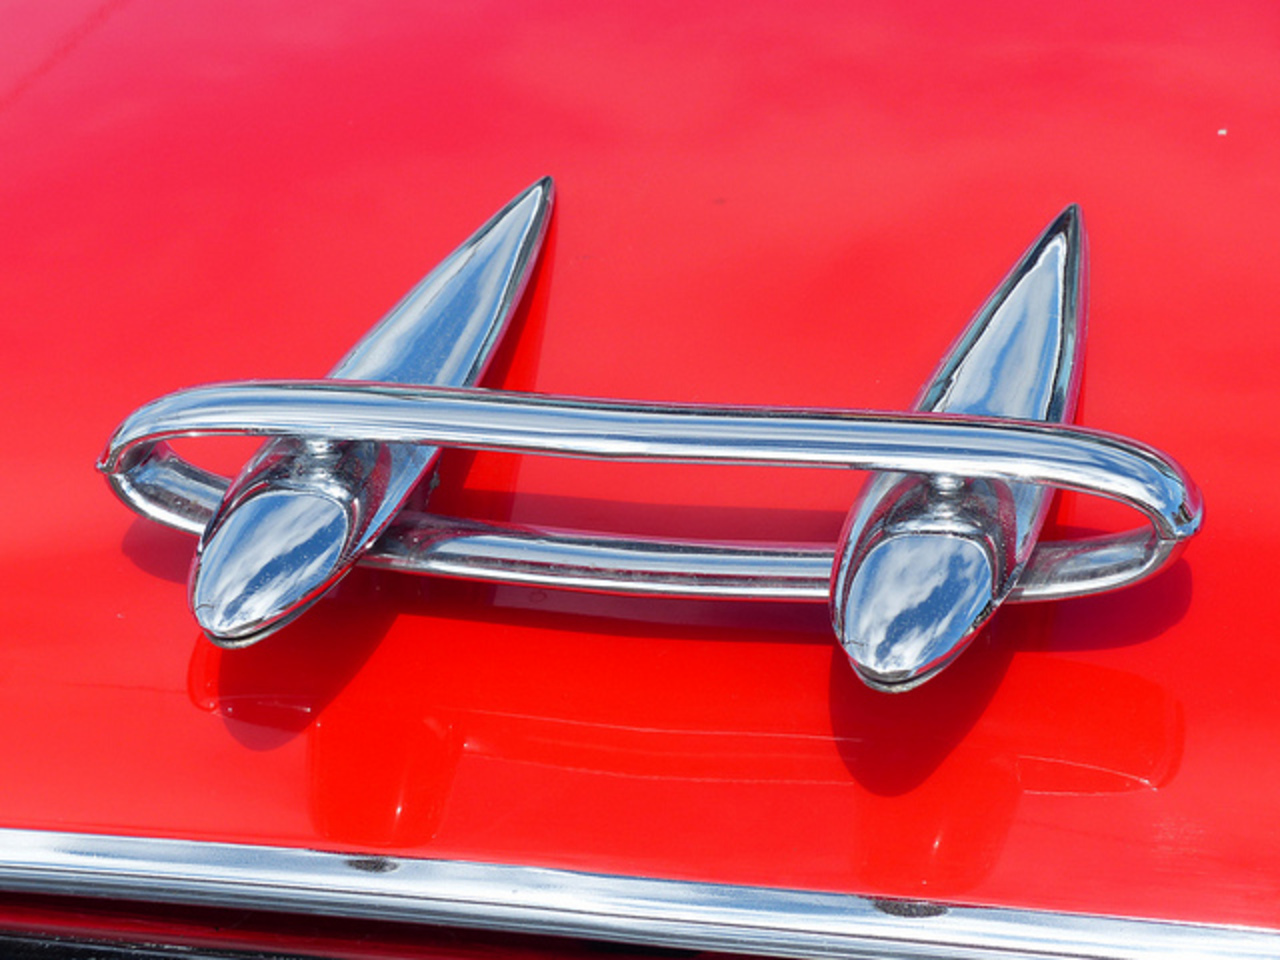 Flickr: The hood ornaments Pool